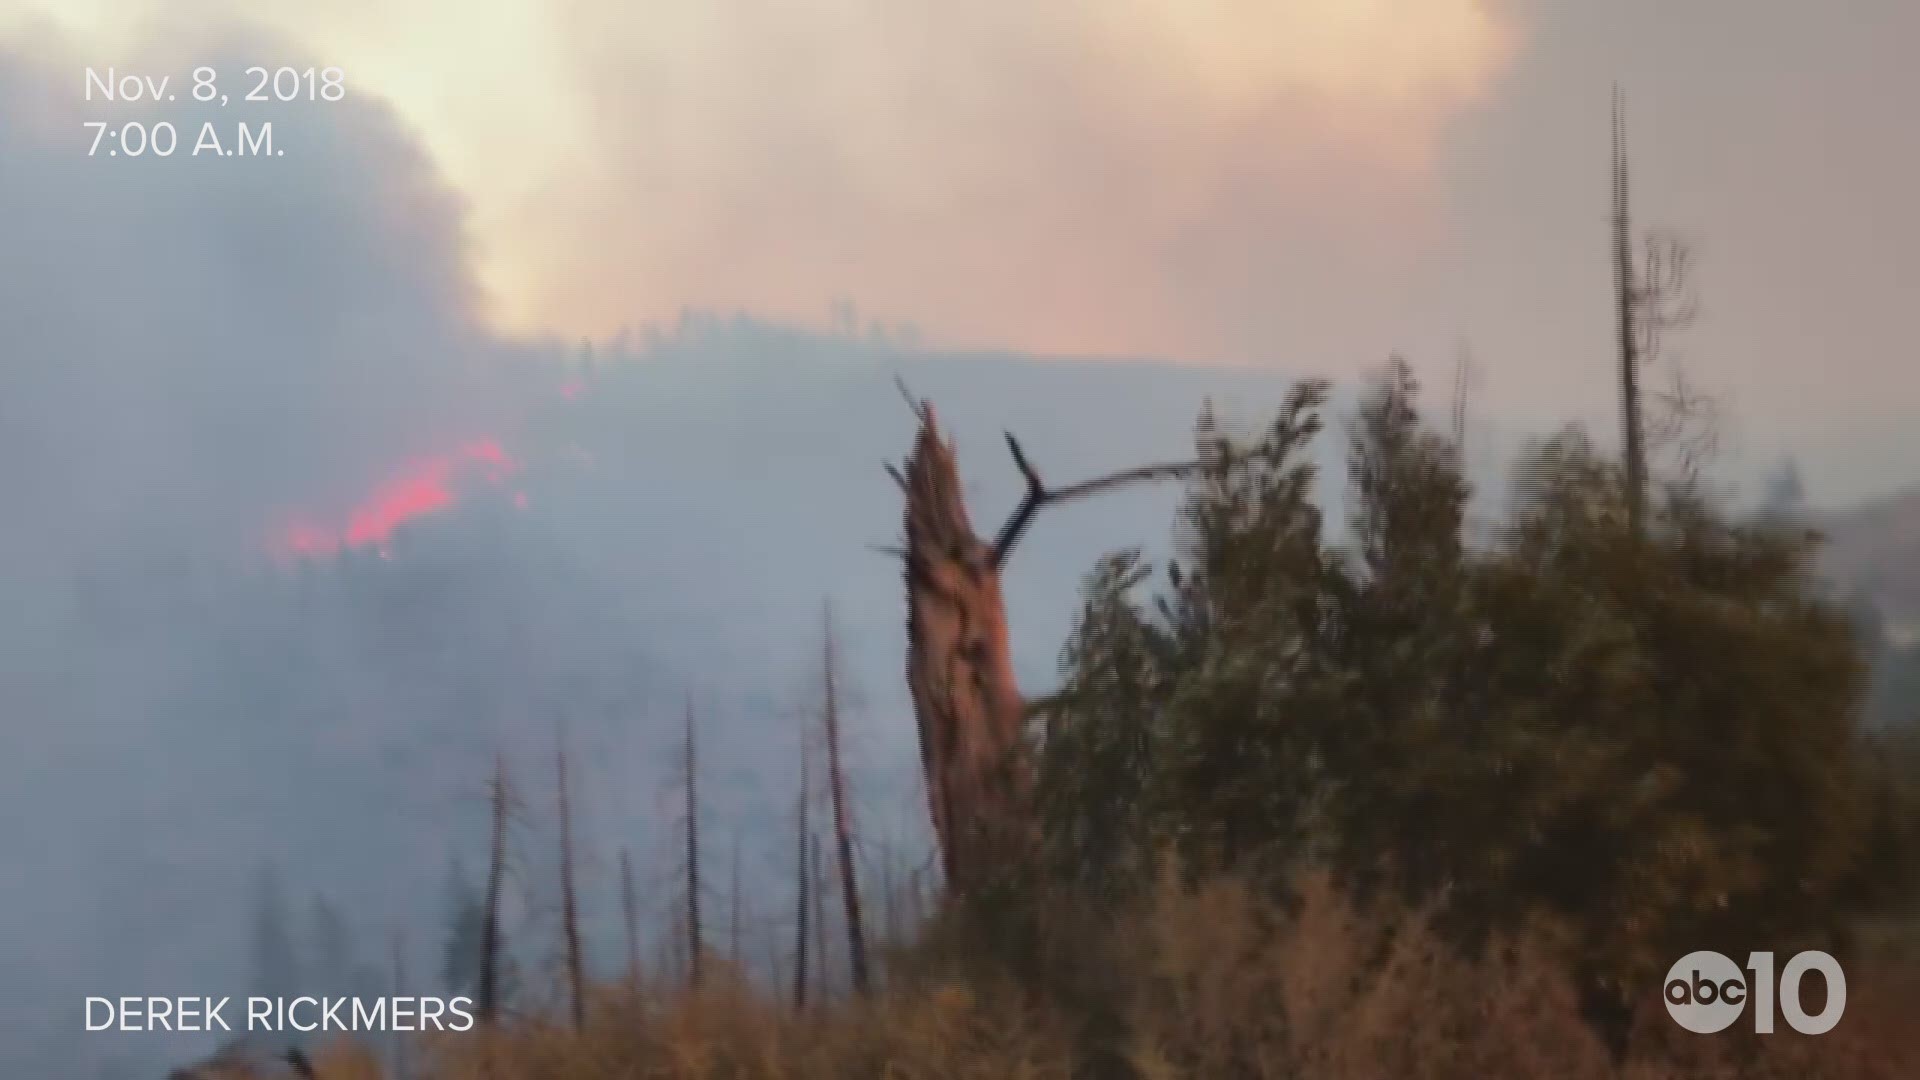 More stories are beginning to emerge from the Camp Fire, and perhaps the earliest glimpse of the disaster was shot by a lifetime resident from Concow, who captured video of the flames and the high winds that fueled them.